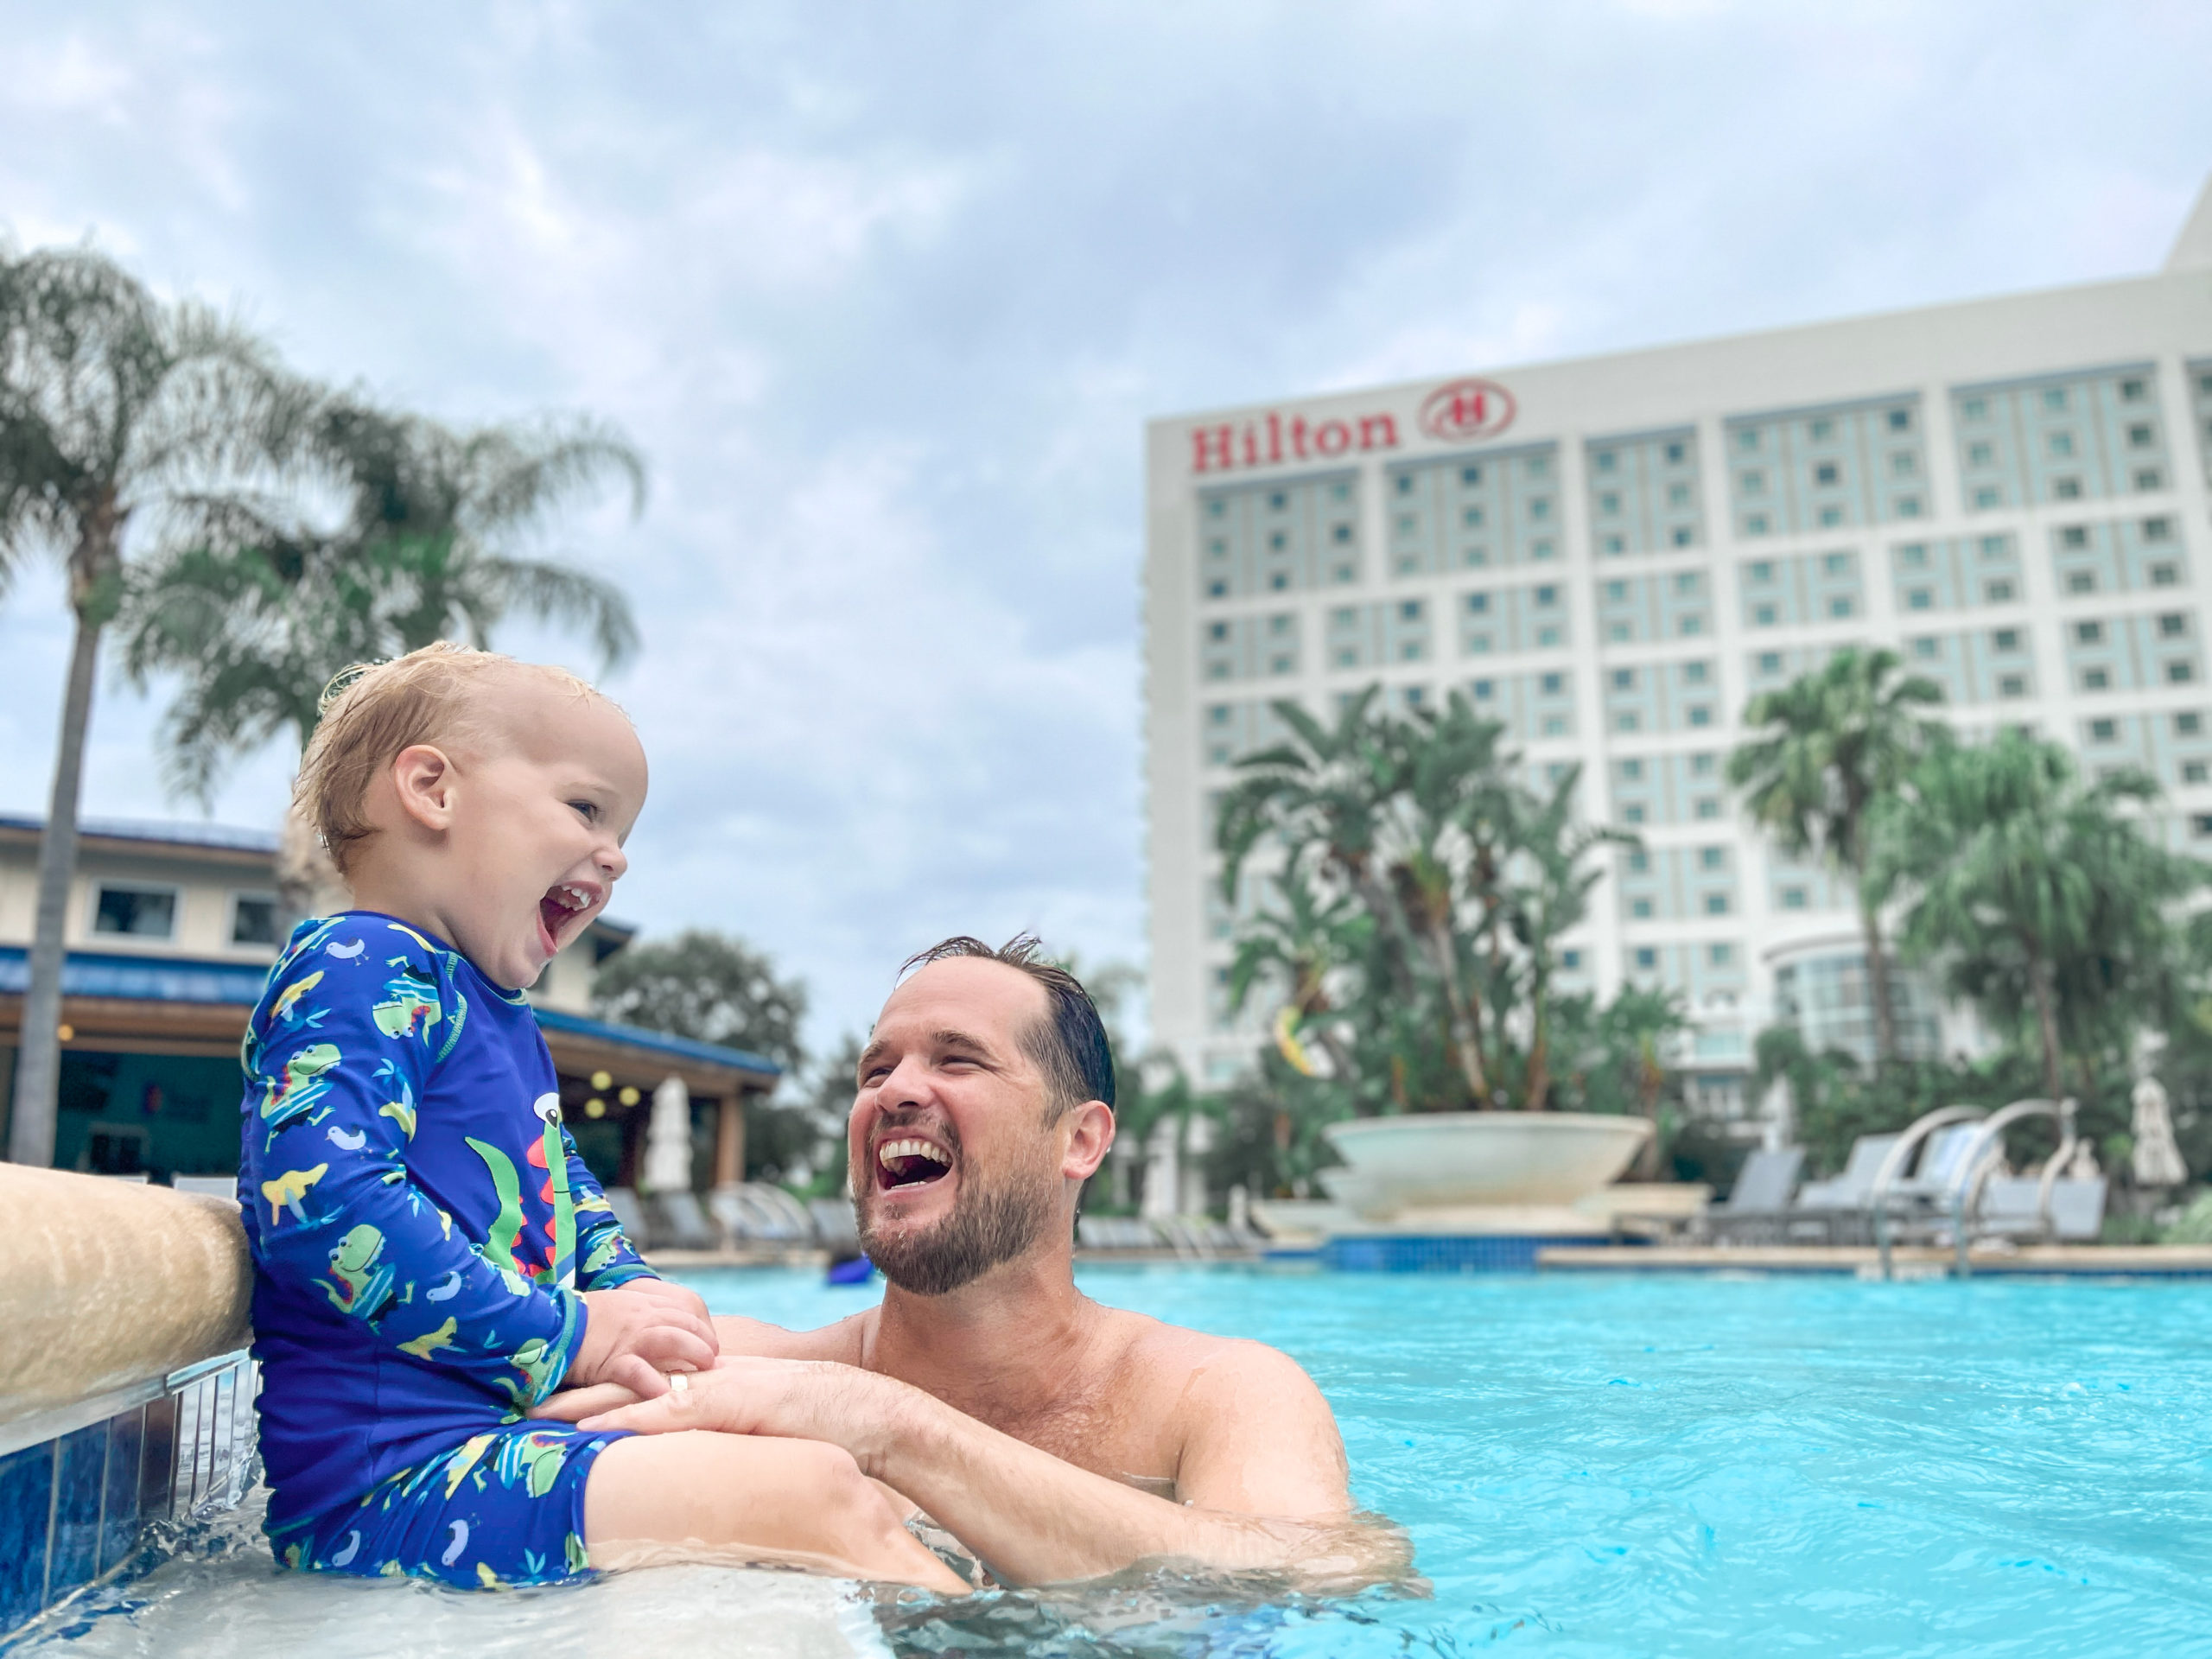 7 Things to do at Hilton Orlando with Kids